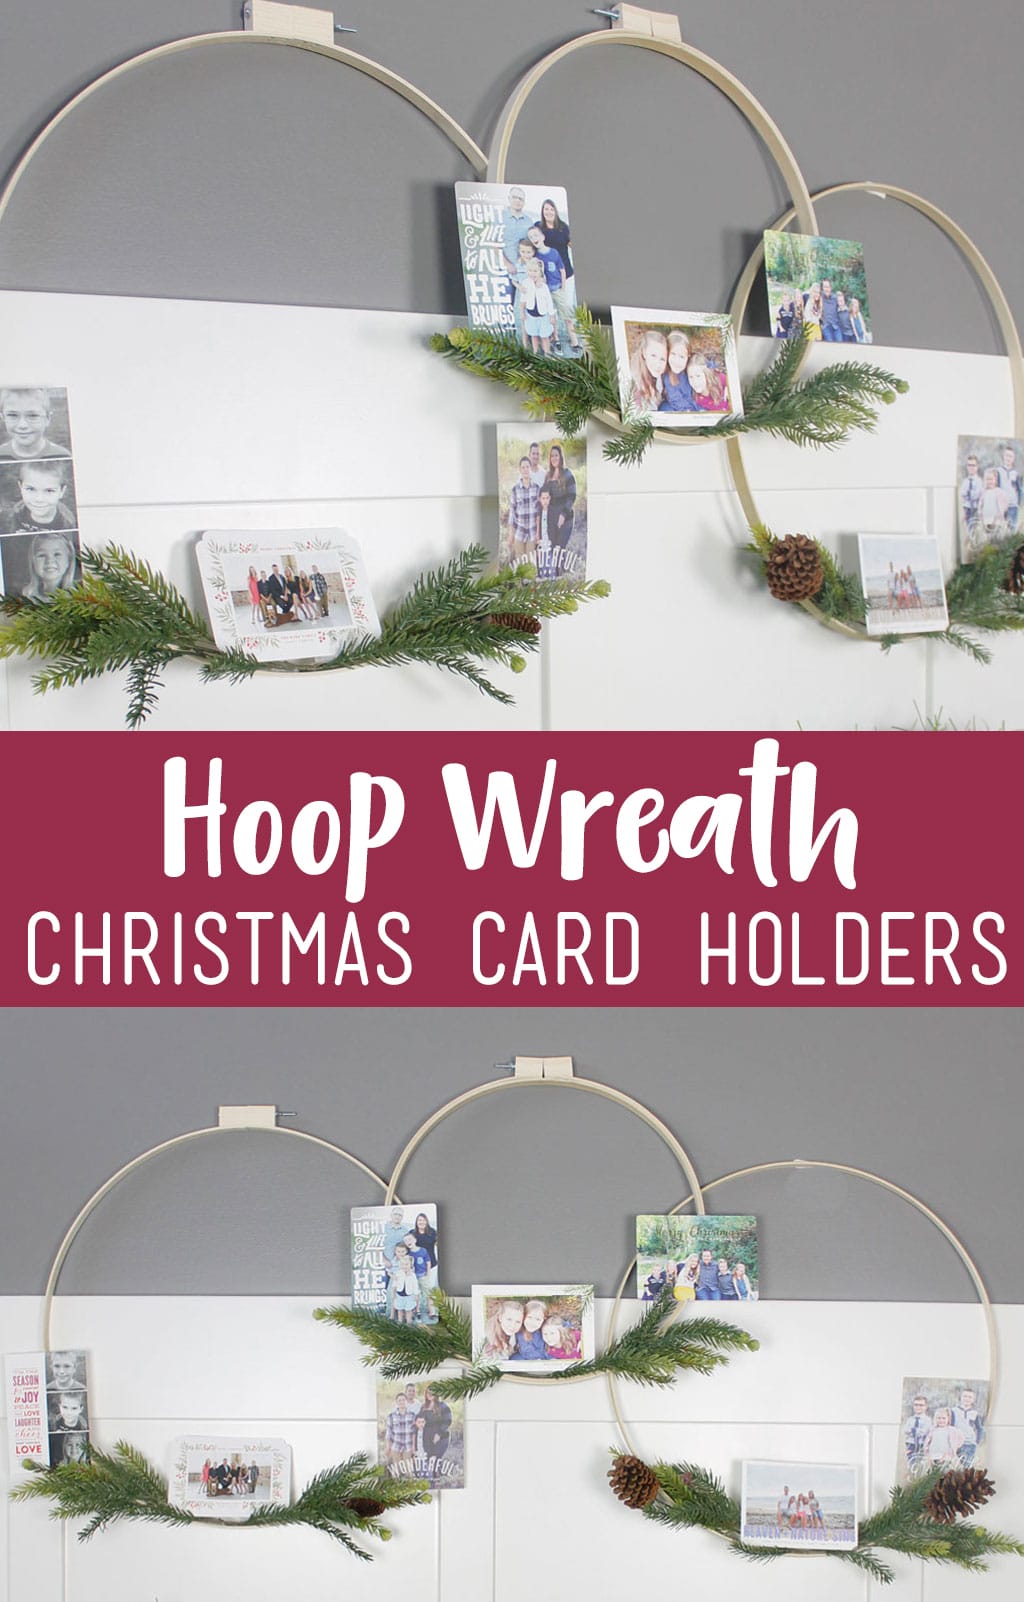 If you love displaying your holiday cards, you are going to love making these Hoop Wreath Christmas Card Holders. They are perfect as home decor, but double to display your @Minted holiday cards. #hoopwreath #christmascarddisplay #chirstmascardholder #Mintedholiday #spons